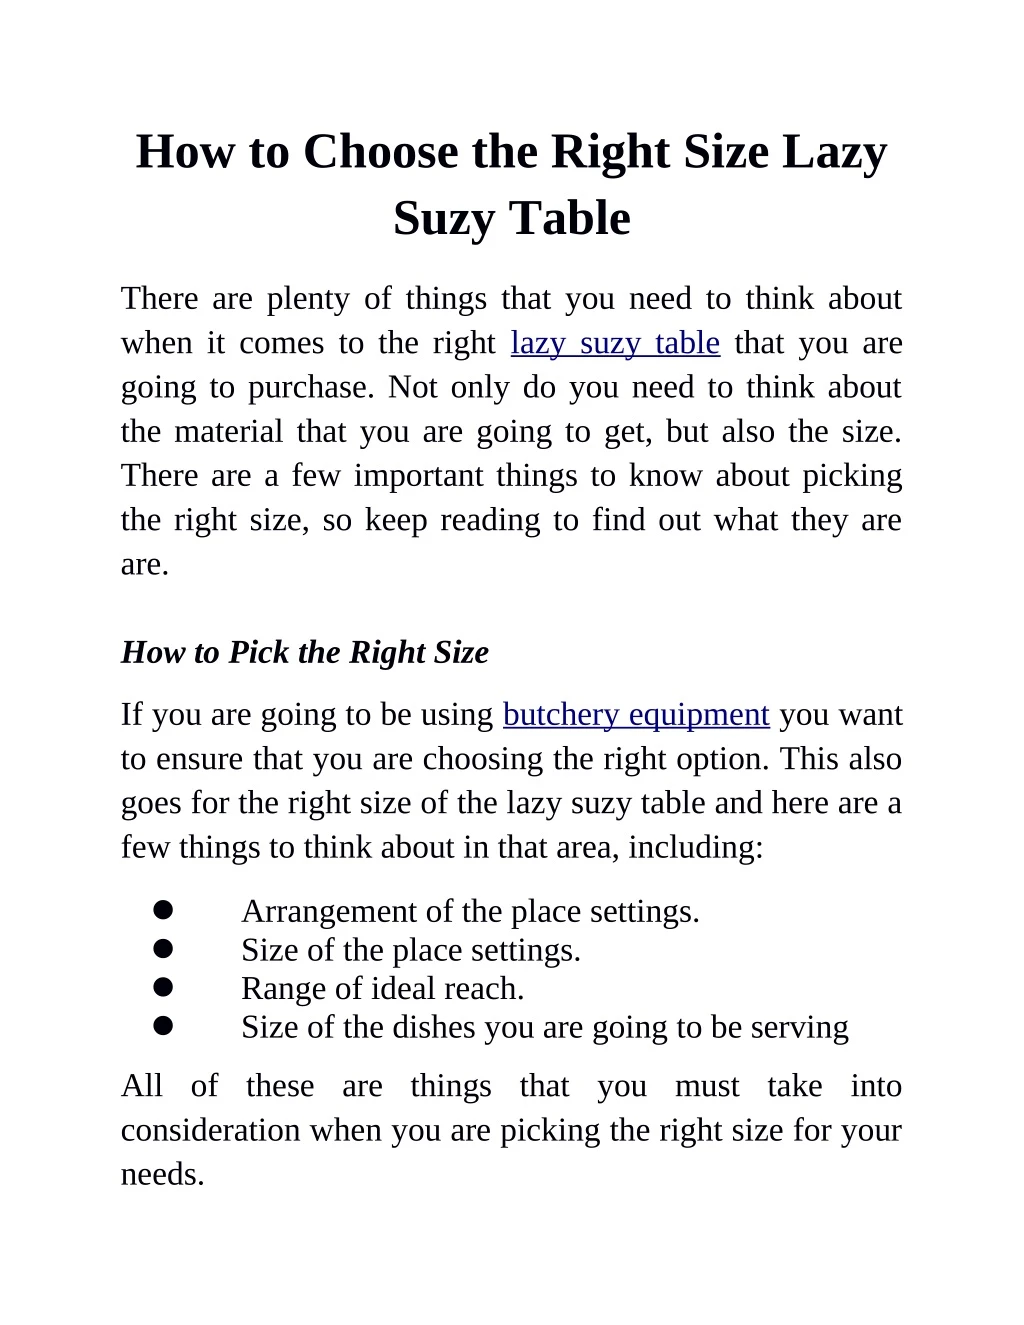 how to choose the right size lazy suzy table